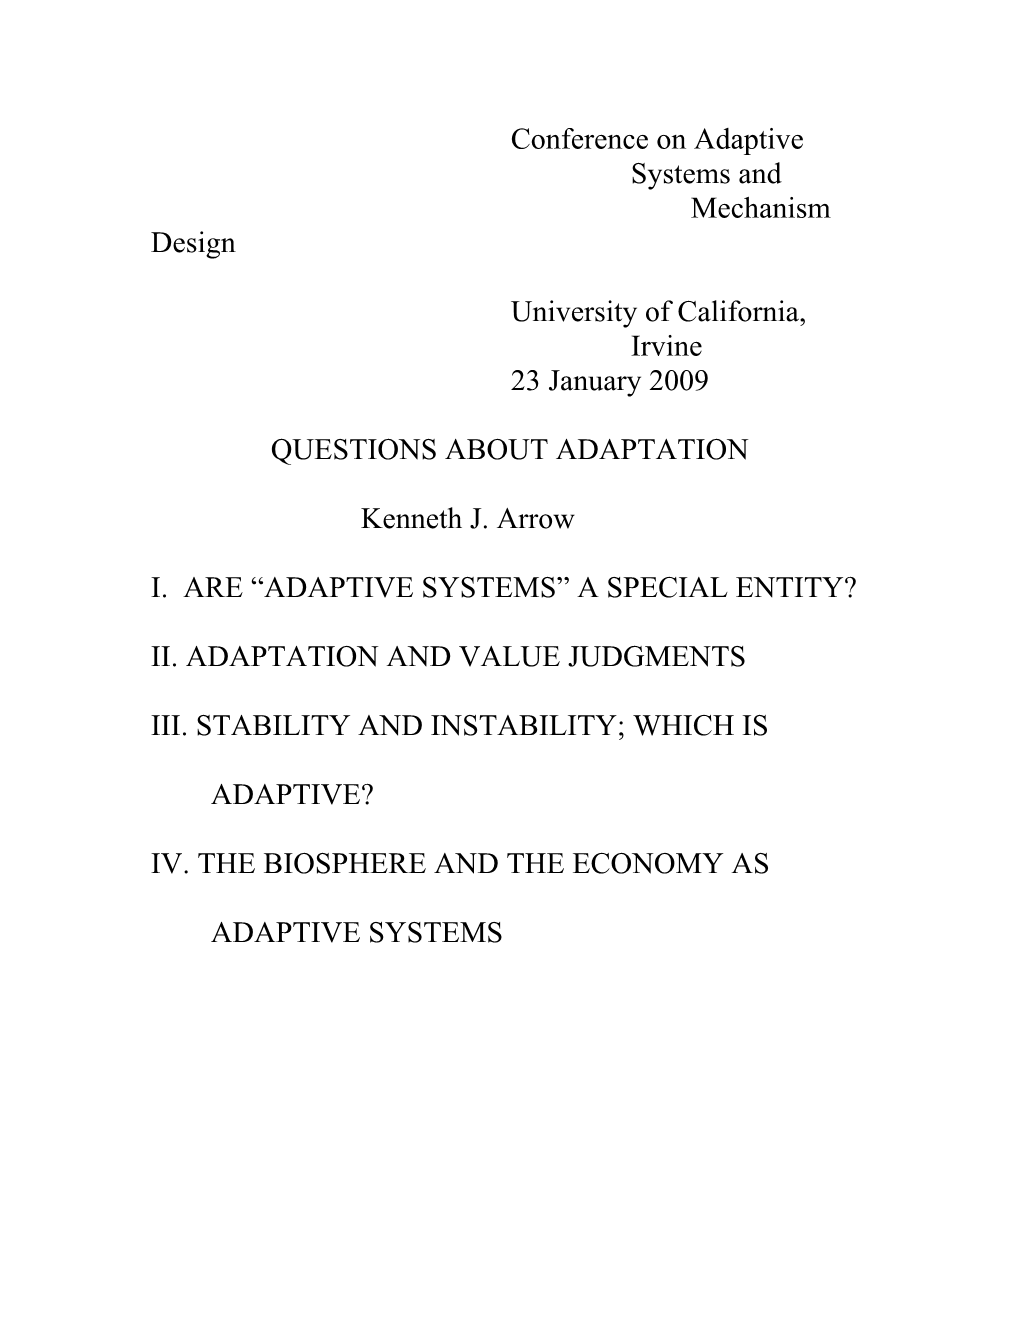 Conference on Adaptive Systems and Mechanism Design